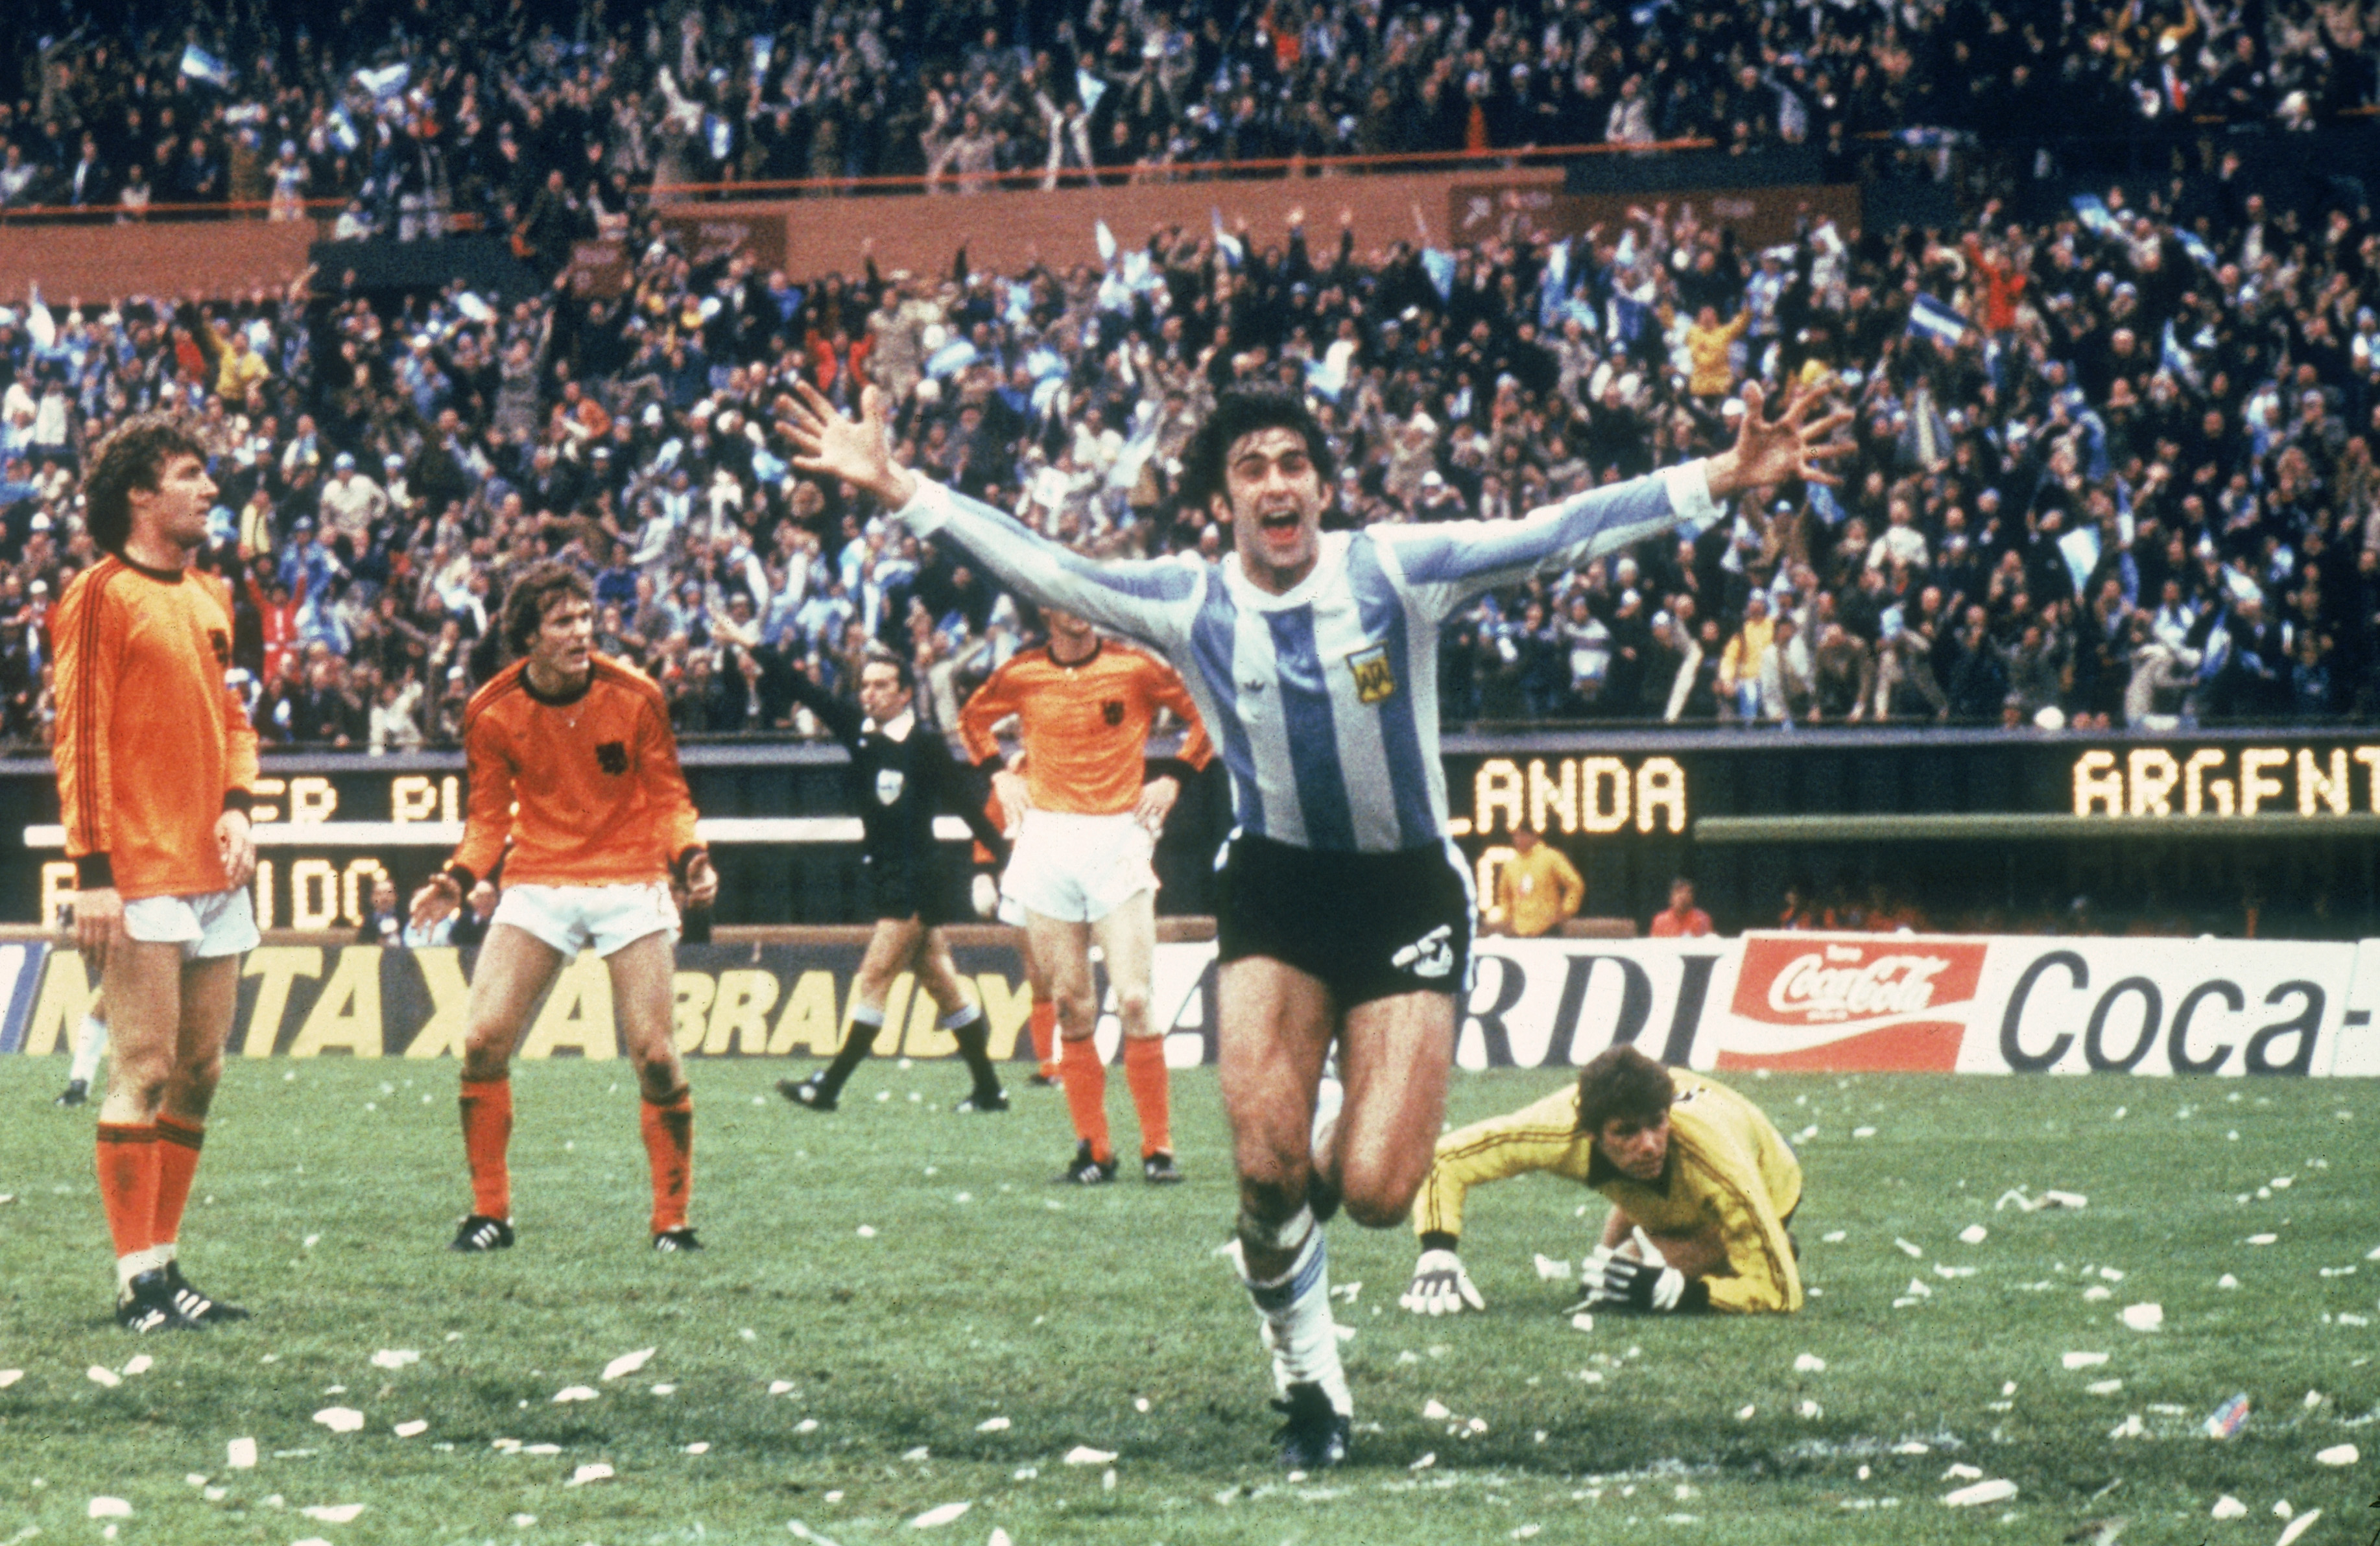 BUENOS AIRES - JUNE 25:  Mario Kempes of Argentina celebrates scoring a goal during the FIFA World Cup Finals 1978 Final between Argentina and Holland held on June 25, 1978 at the River Plate Stadium, in Buenos Aires, Argentina. Argentina won the match an